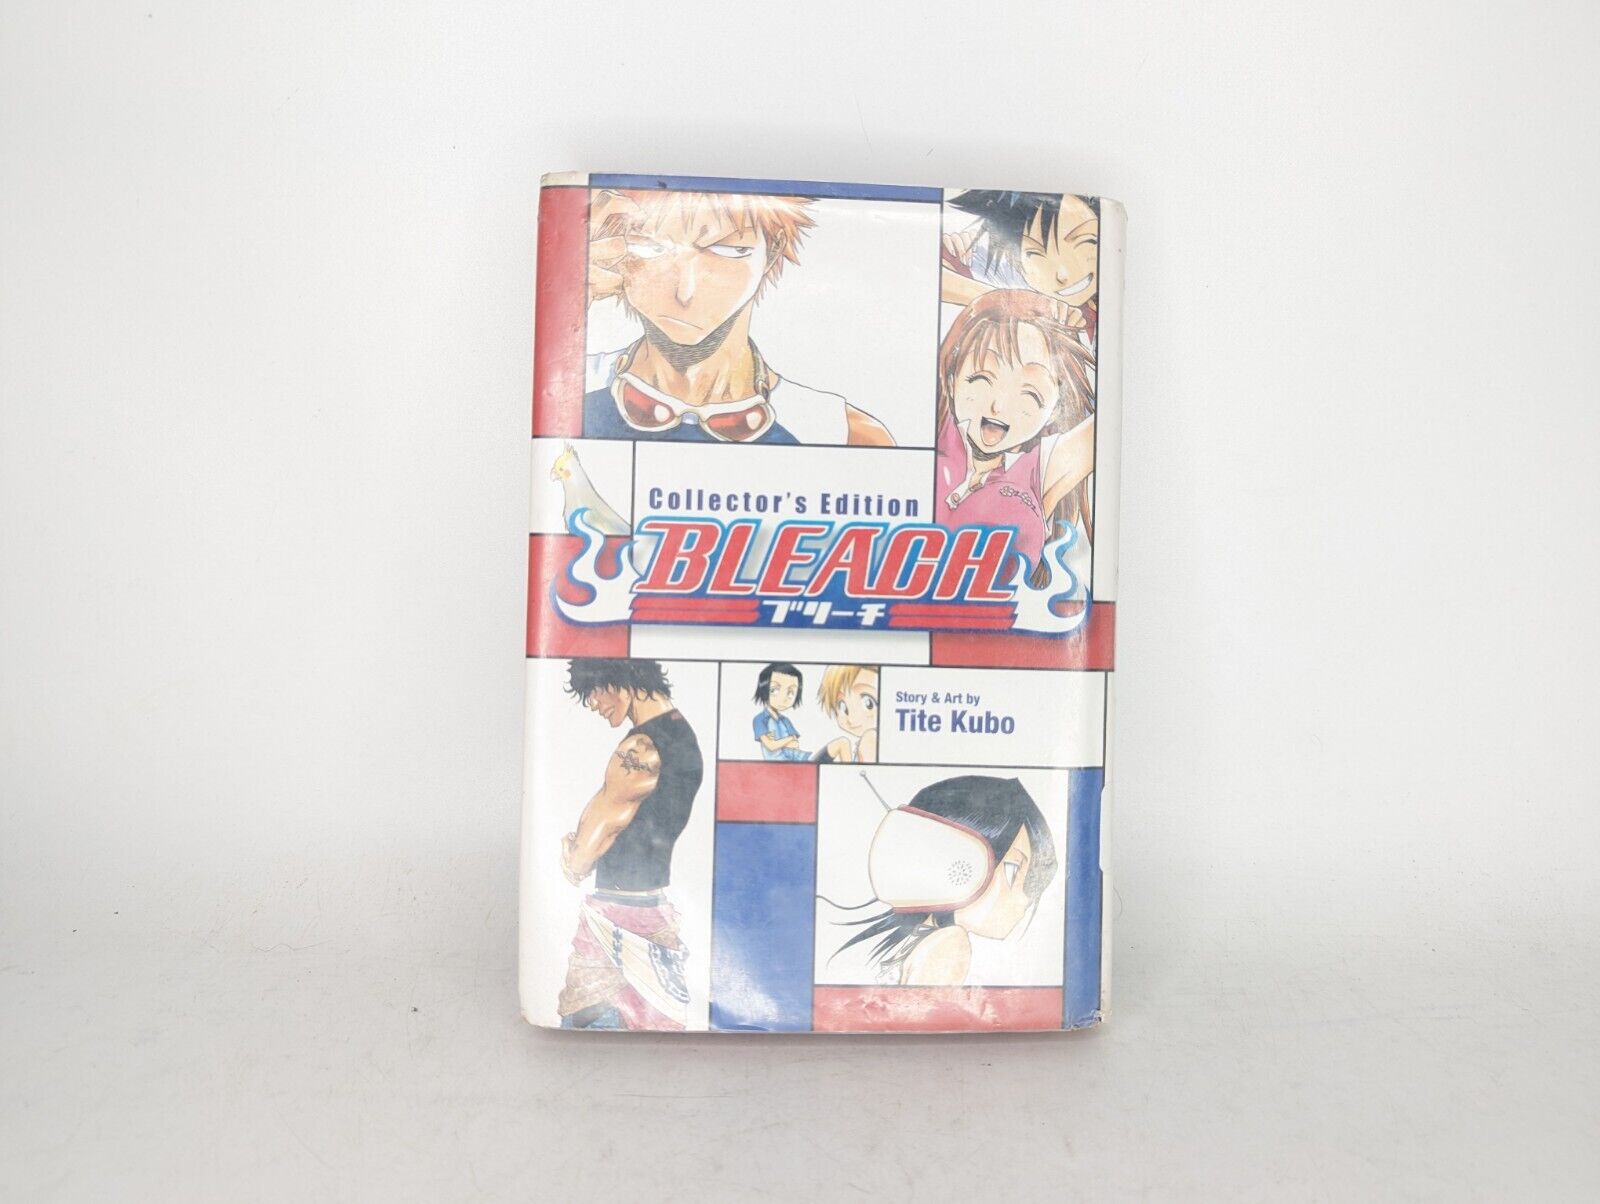 Bleach Volume 1 Collector’s Edition Hardcover Manga (Ex Library Copy)